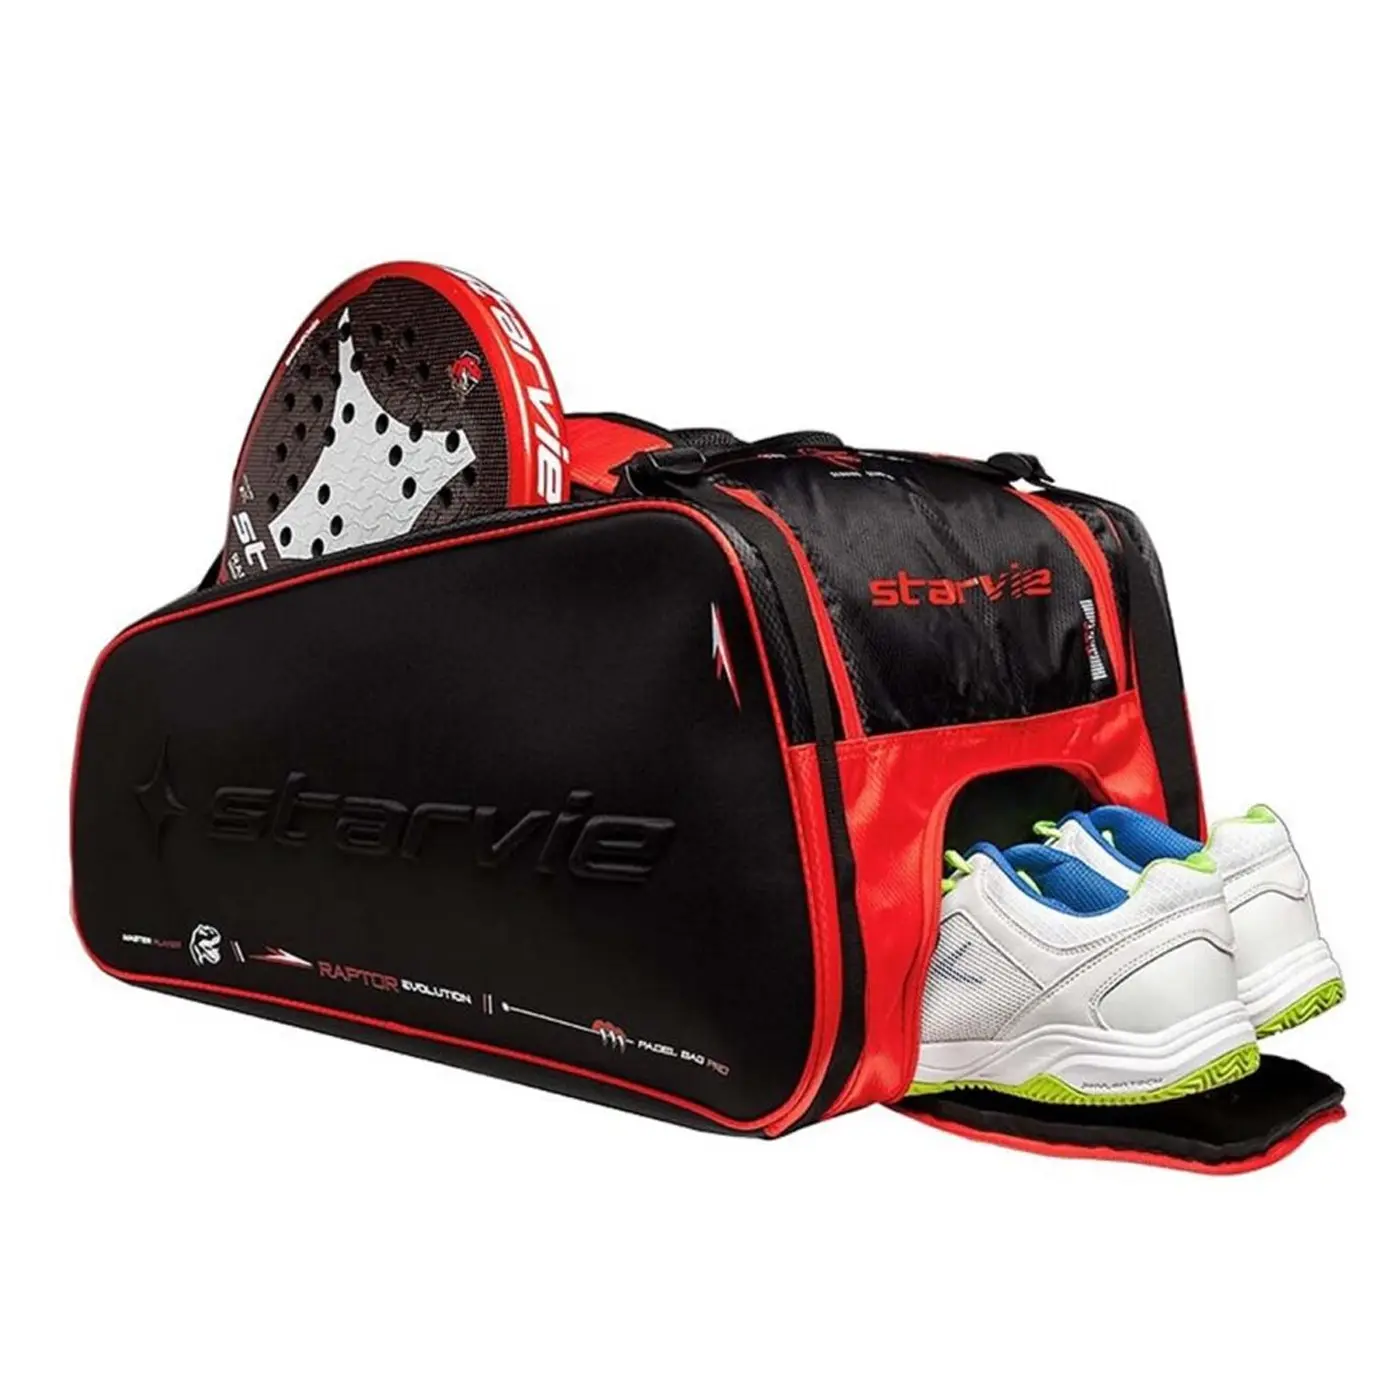 Amazon.com : ZUSSET - Padel Bag Paddle Tennis Backpack | 2 compartments for  2 Racquets : Sports & Outdoors